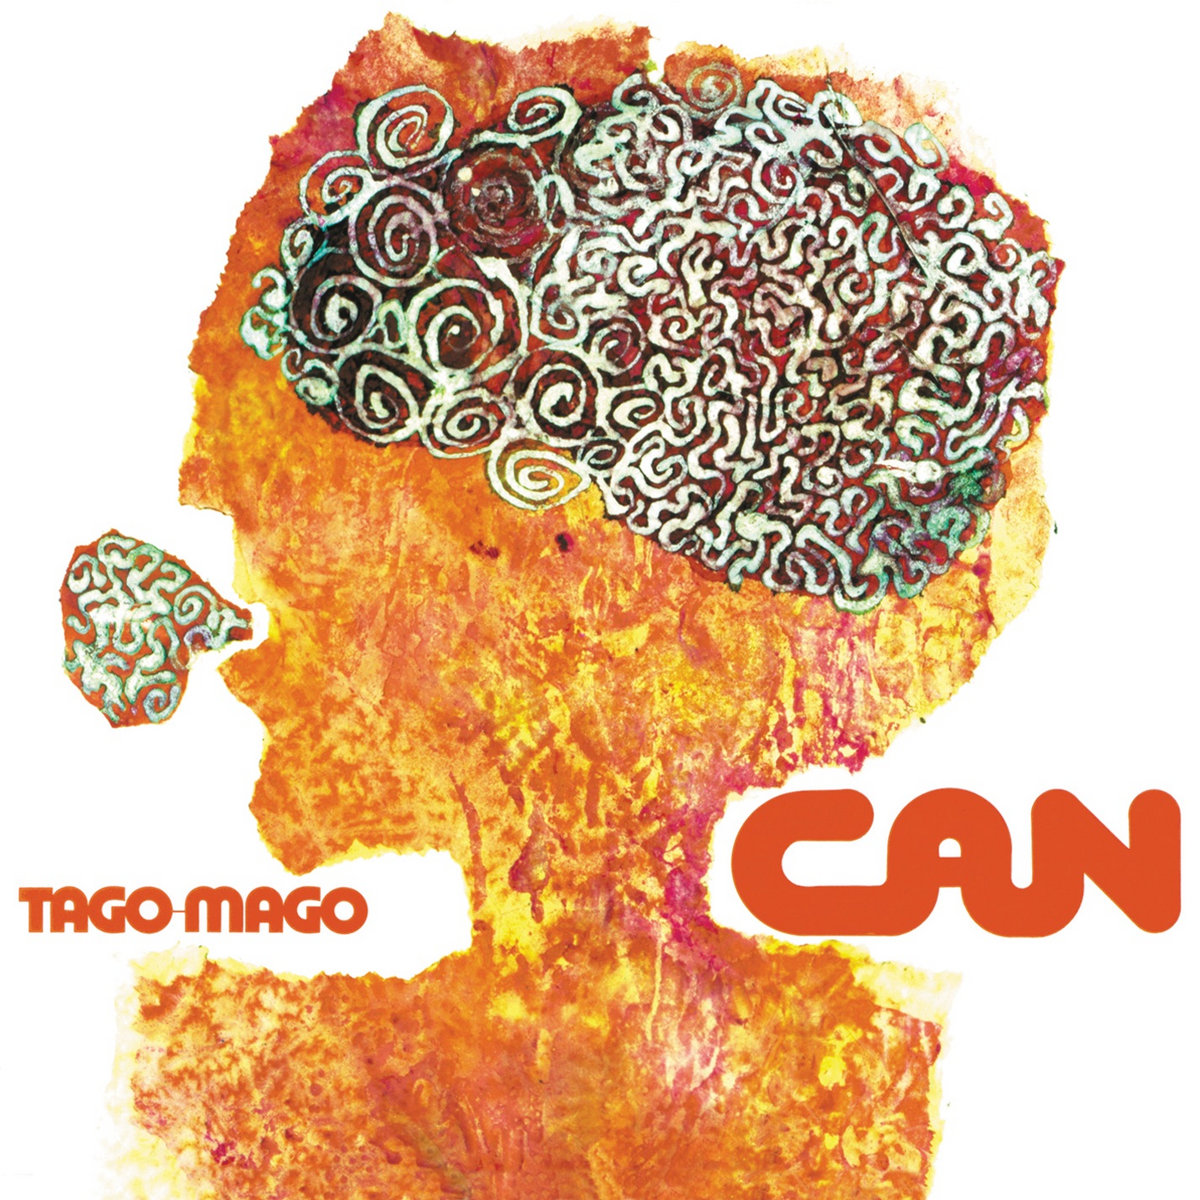 "Tago Mago" by Can album cover